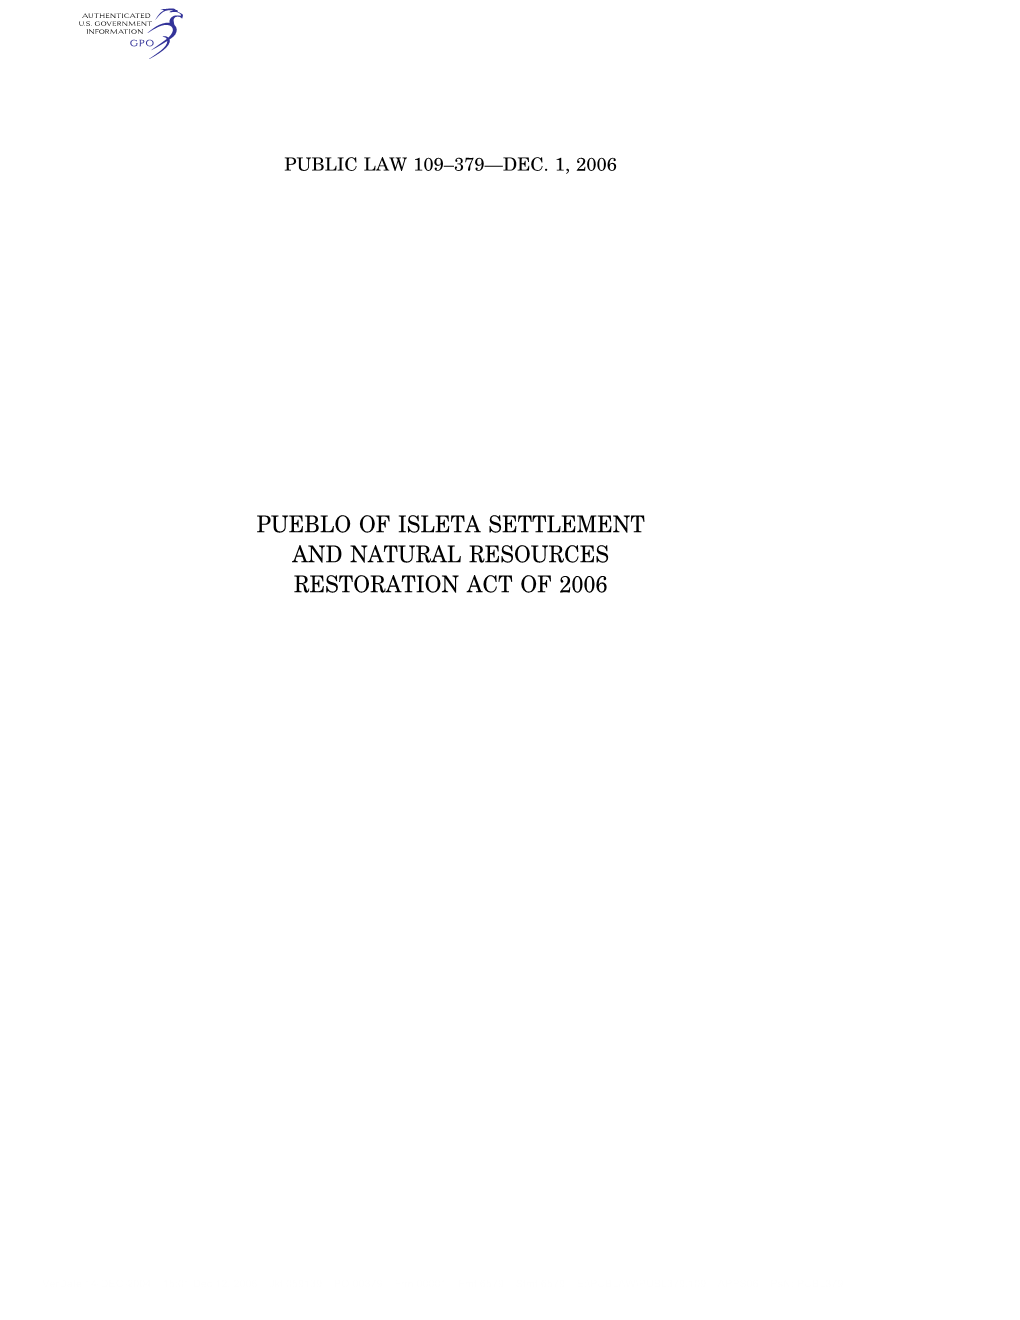 Pueblo of Isleta Settlement and Natural Resources Restoration Act of 2006